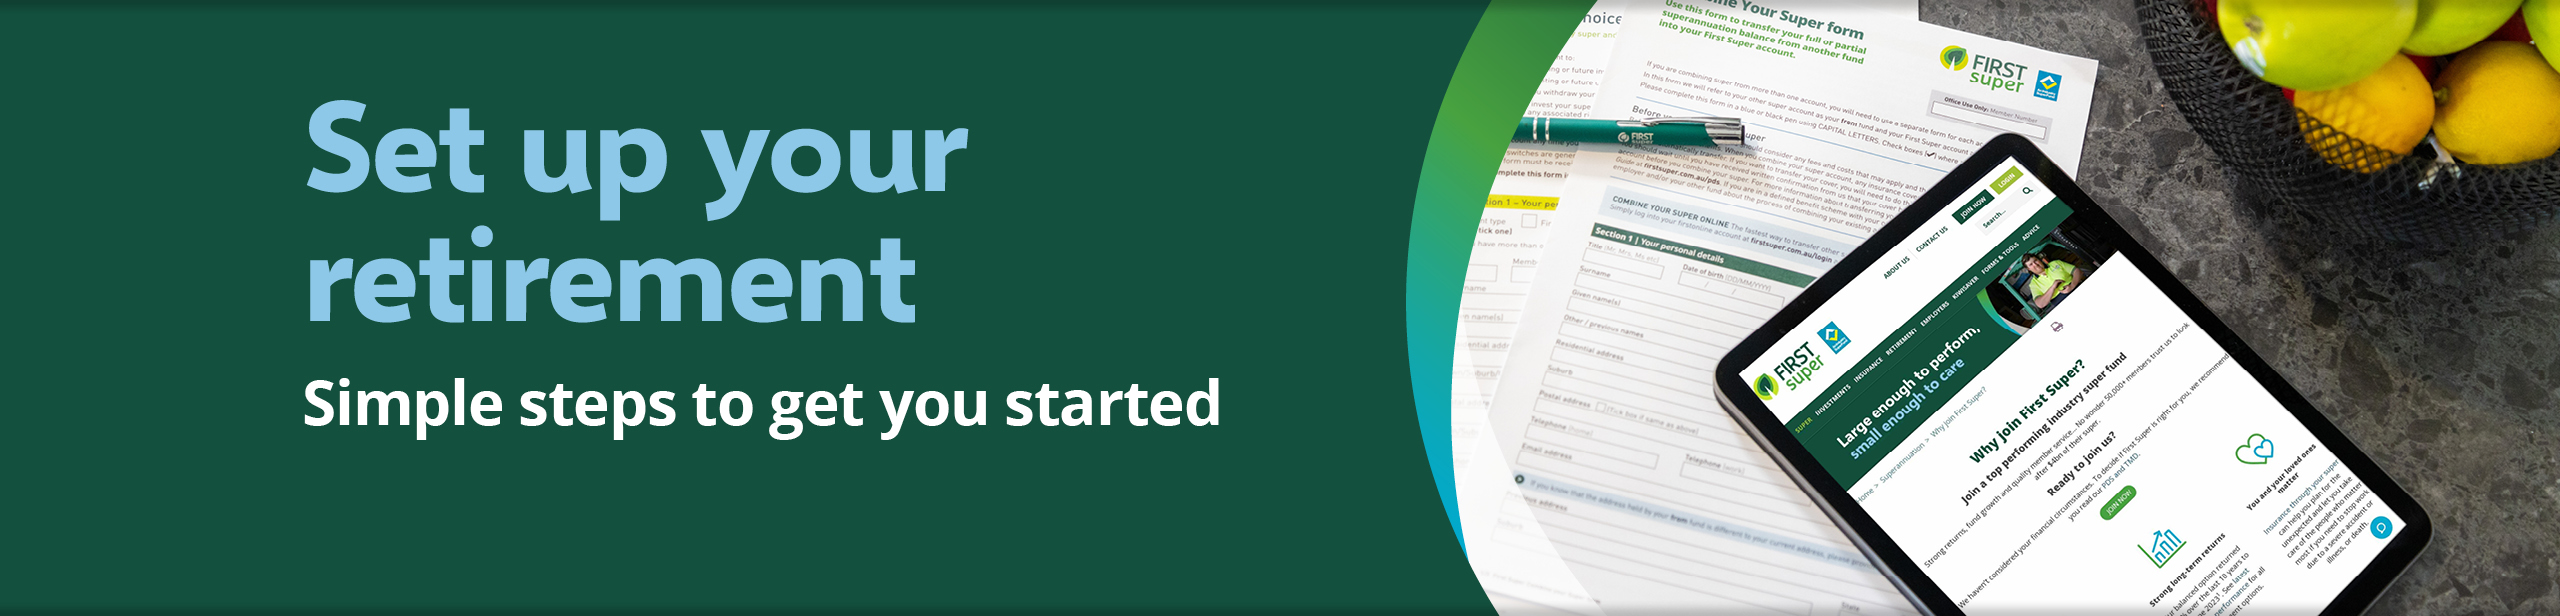 set up your retirement, simple steps to get you started - image of retirement forms and ipad